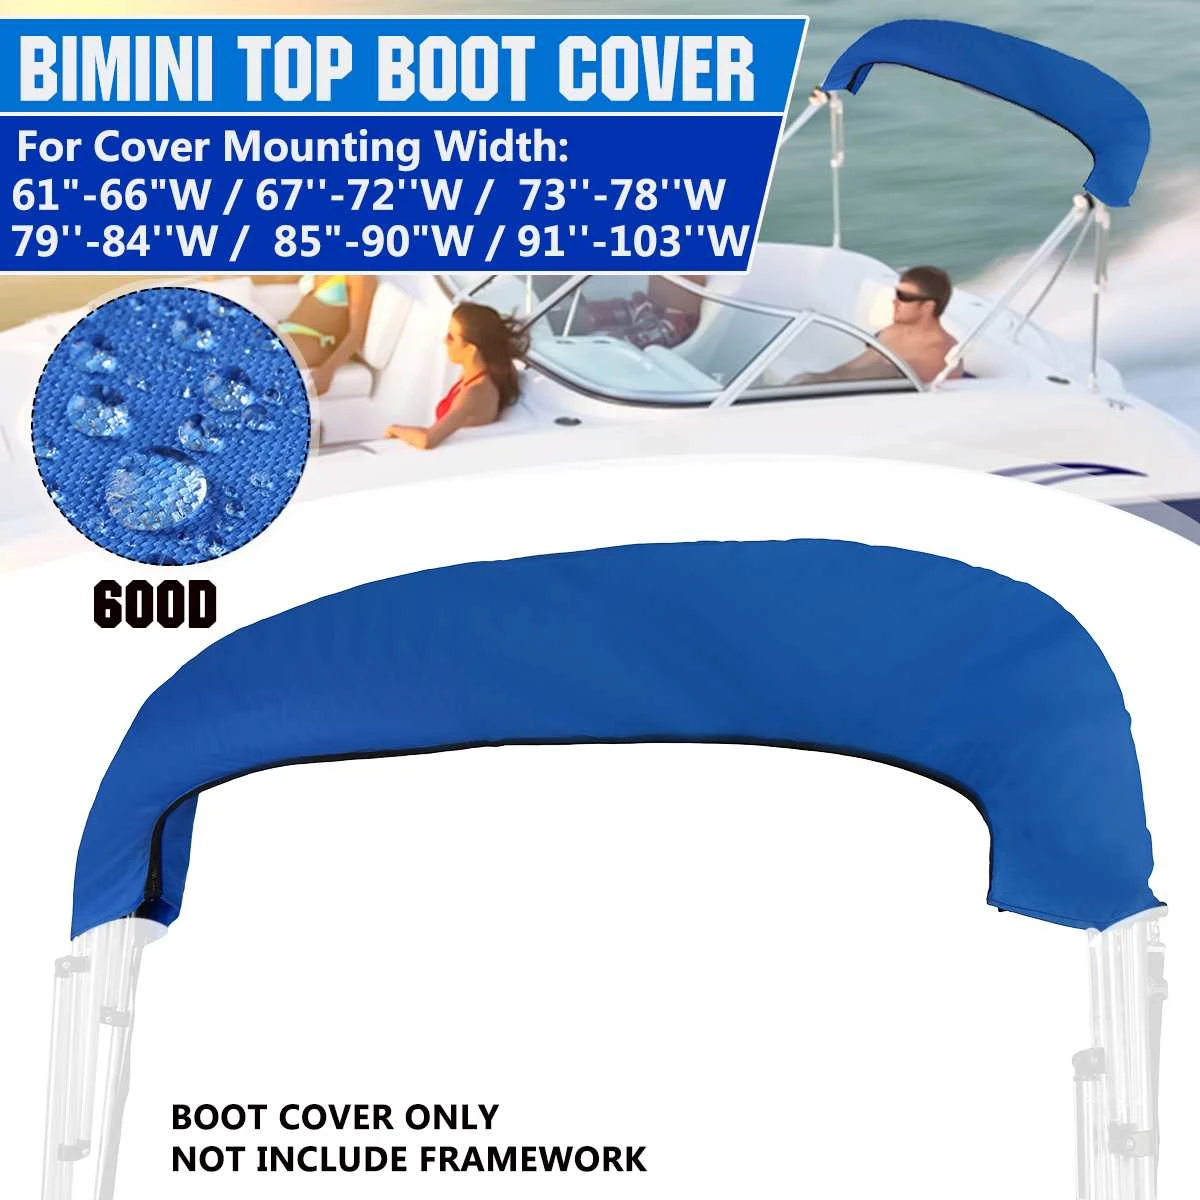 4 BOW Bimini Top Boot Cover 600D Waterproof Anti UV Boat Cover No Frame Marine Dustproof Cover Boat Accessories Black/Blue